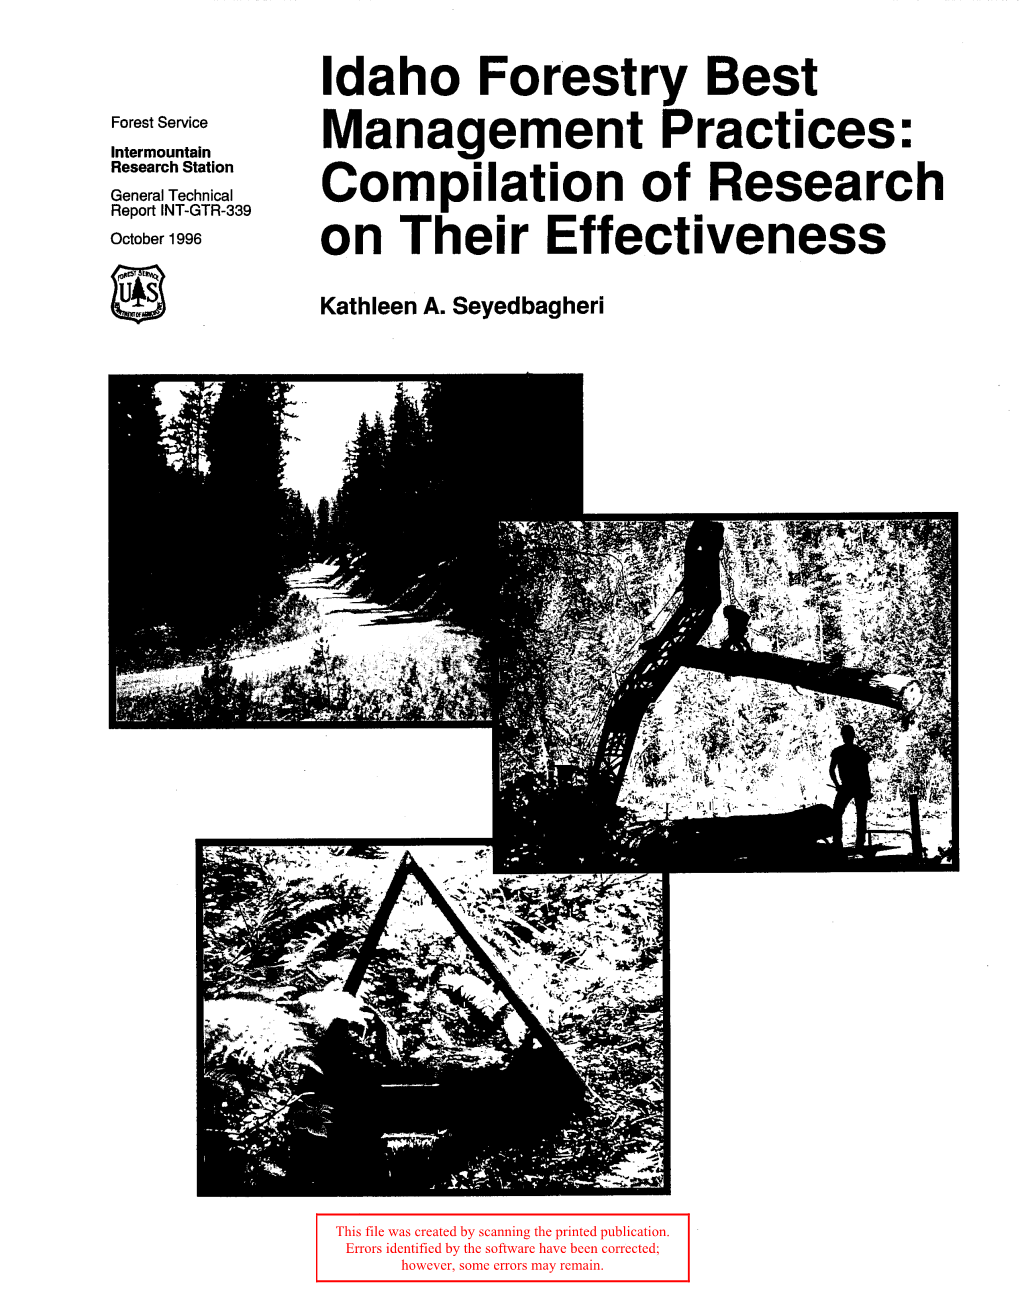 Ldaho Forestry Best Management Practices: Compilation of Research on Their Effectiveness